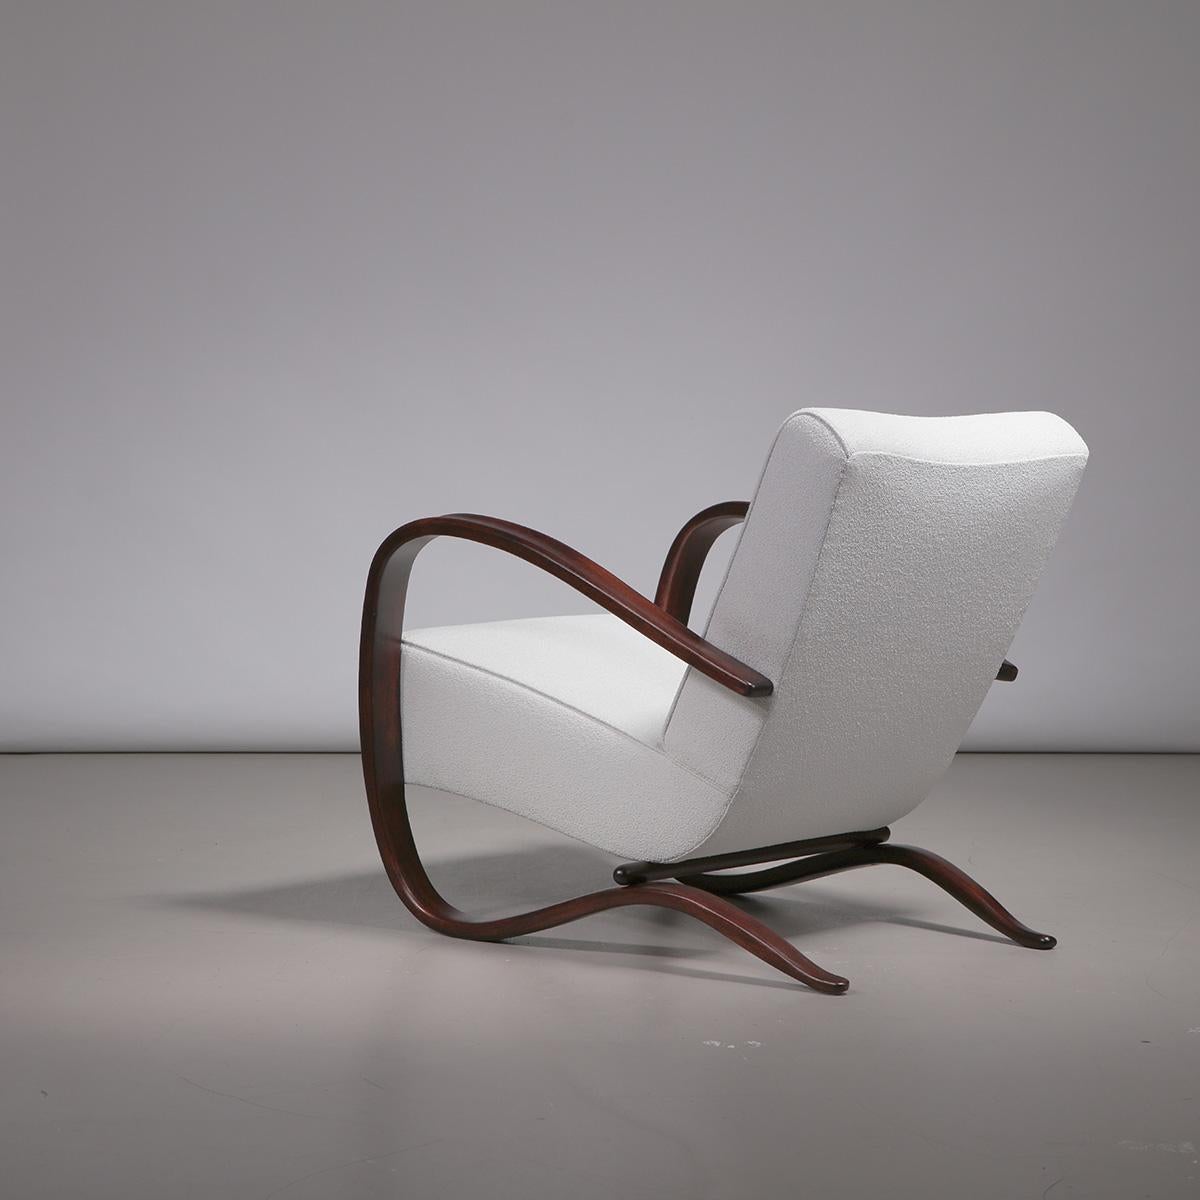 Lounge chair in wood and fabric, model 